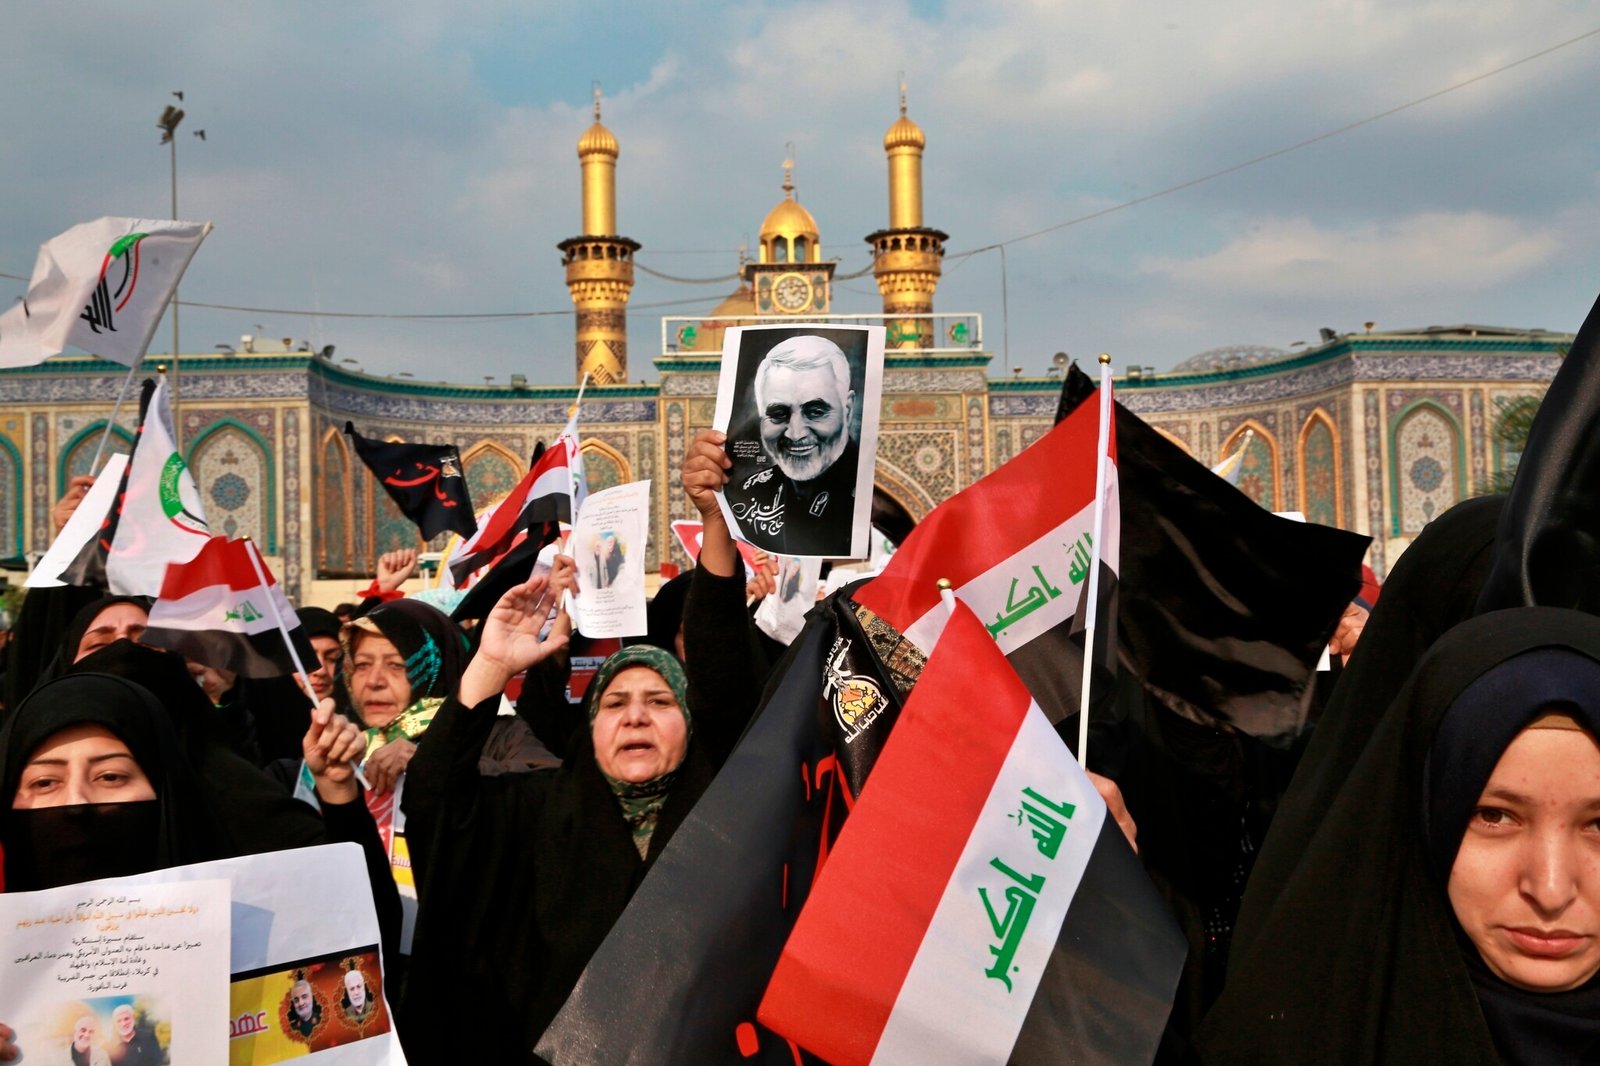 Iran threatens Tel Aviv, US bases in Middle East after killing of Soleimani: Shiite Muslims demonstrate over the US airstrike that killed Iranian Revolutionary Guard Gen. Qassem Soleimani, in the posters, in Karbala, Iraq, Jan. 4, 2020 (AP Photo/Khalid Mohammed)